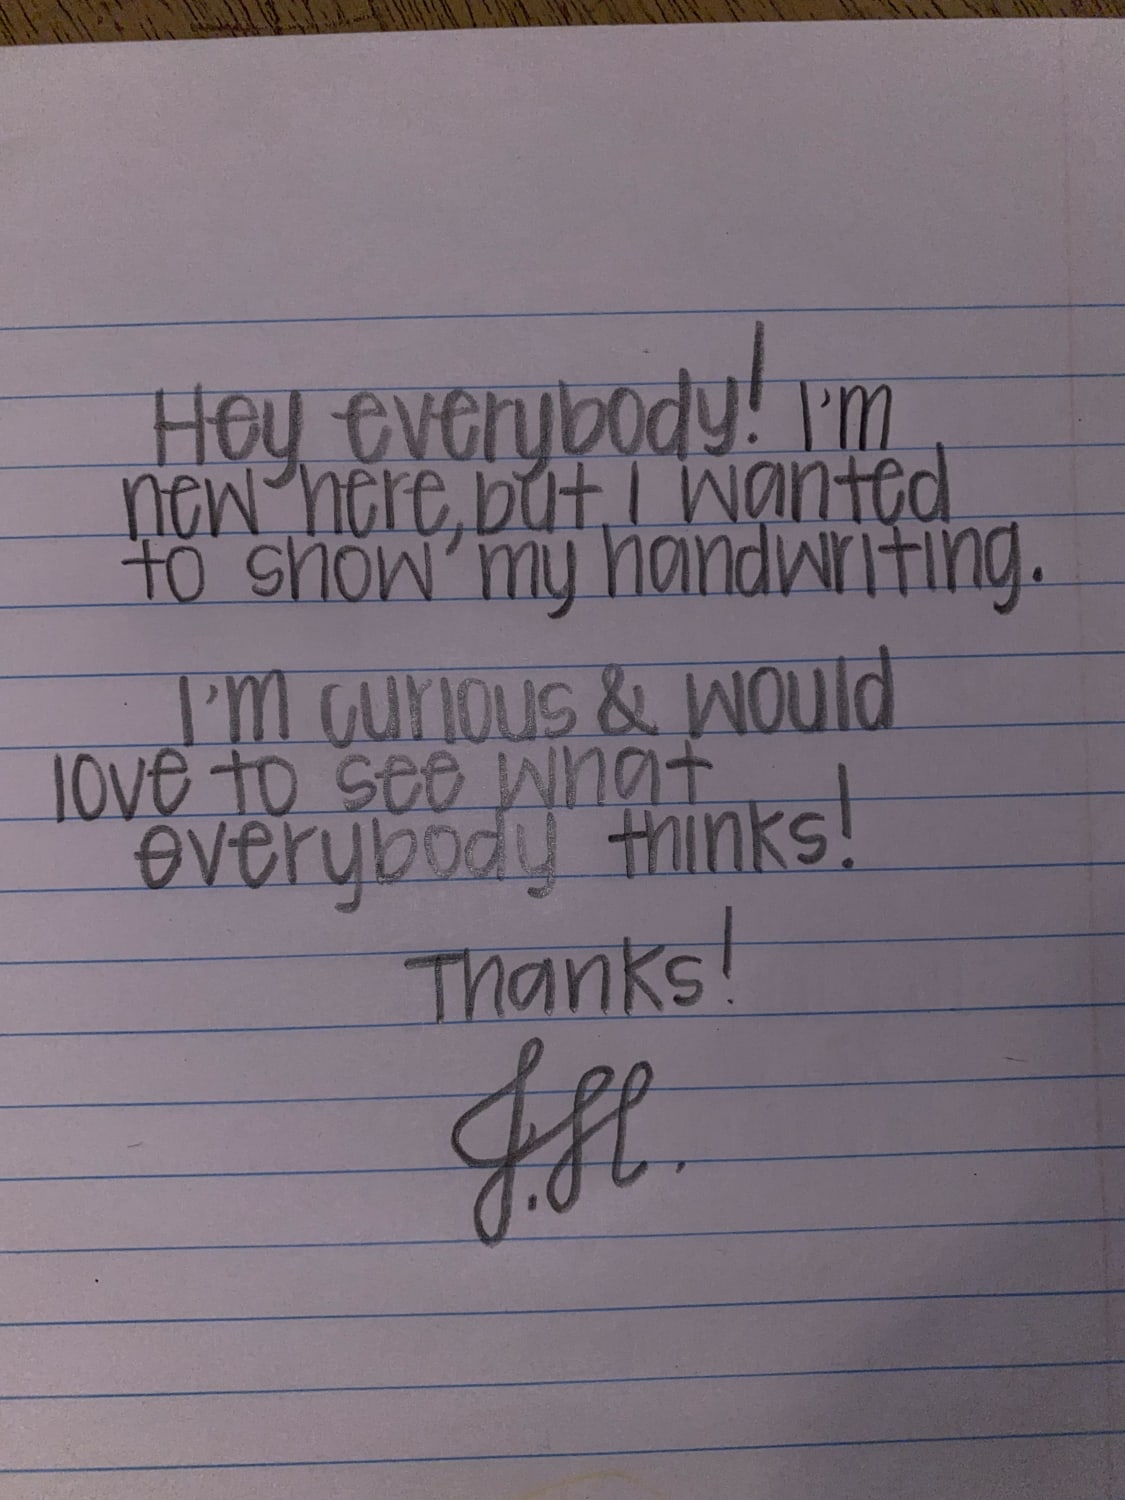 Just wanted to show my penmanship 😇Thoughts?